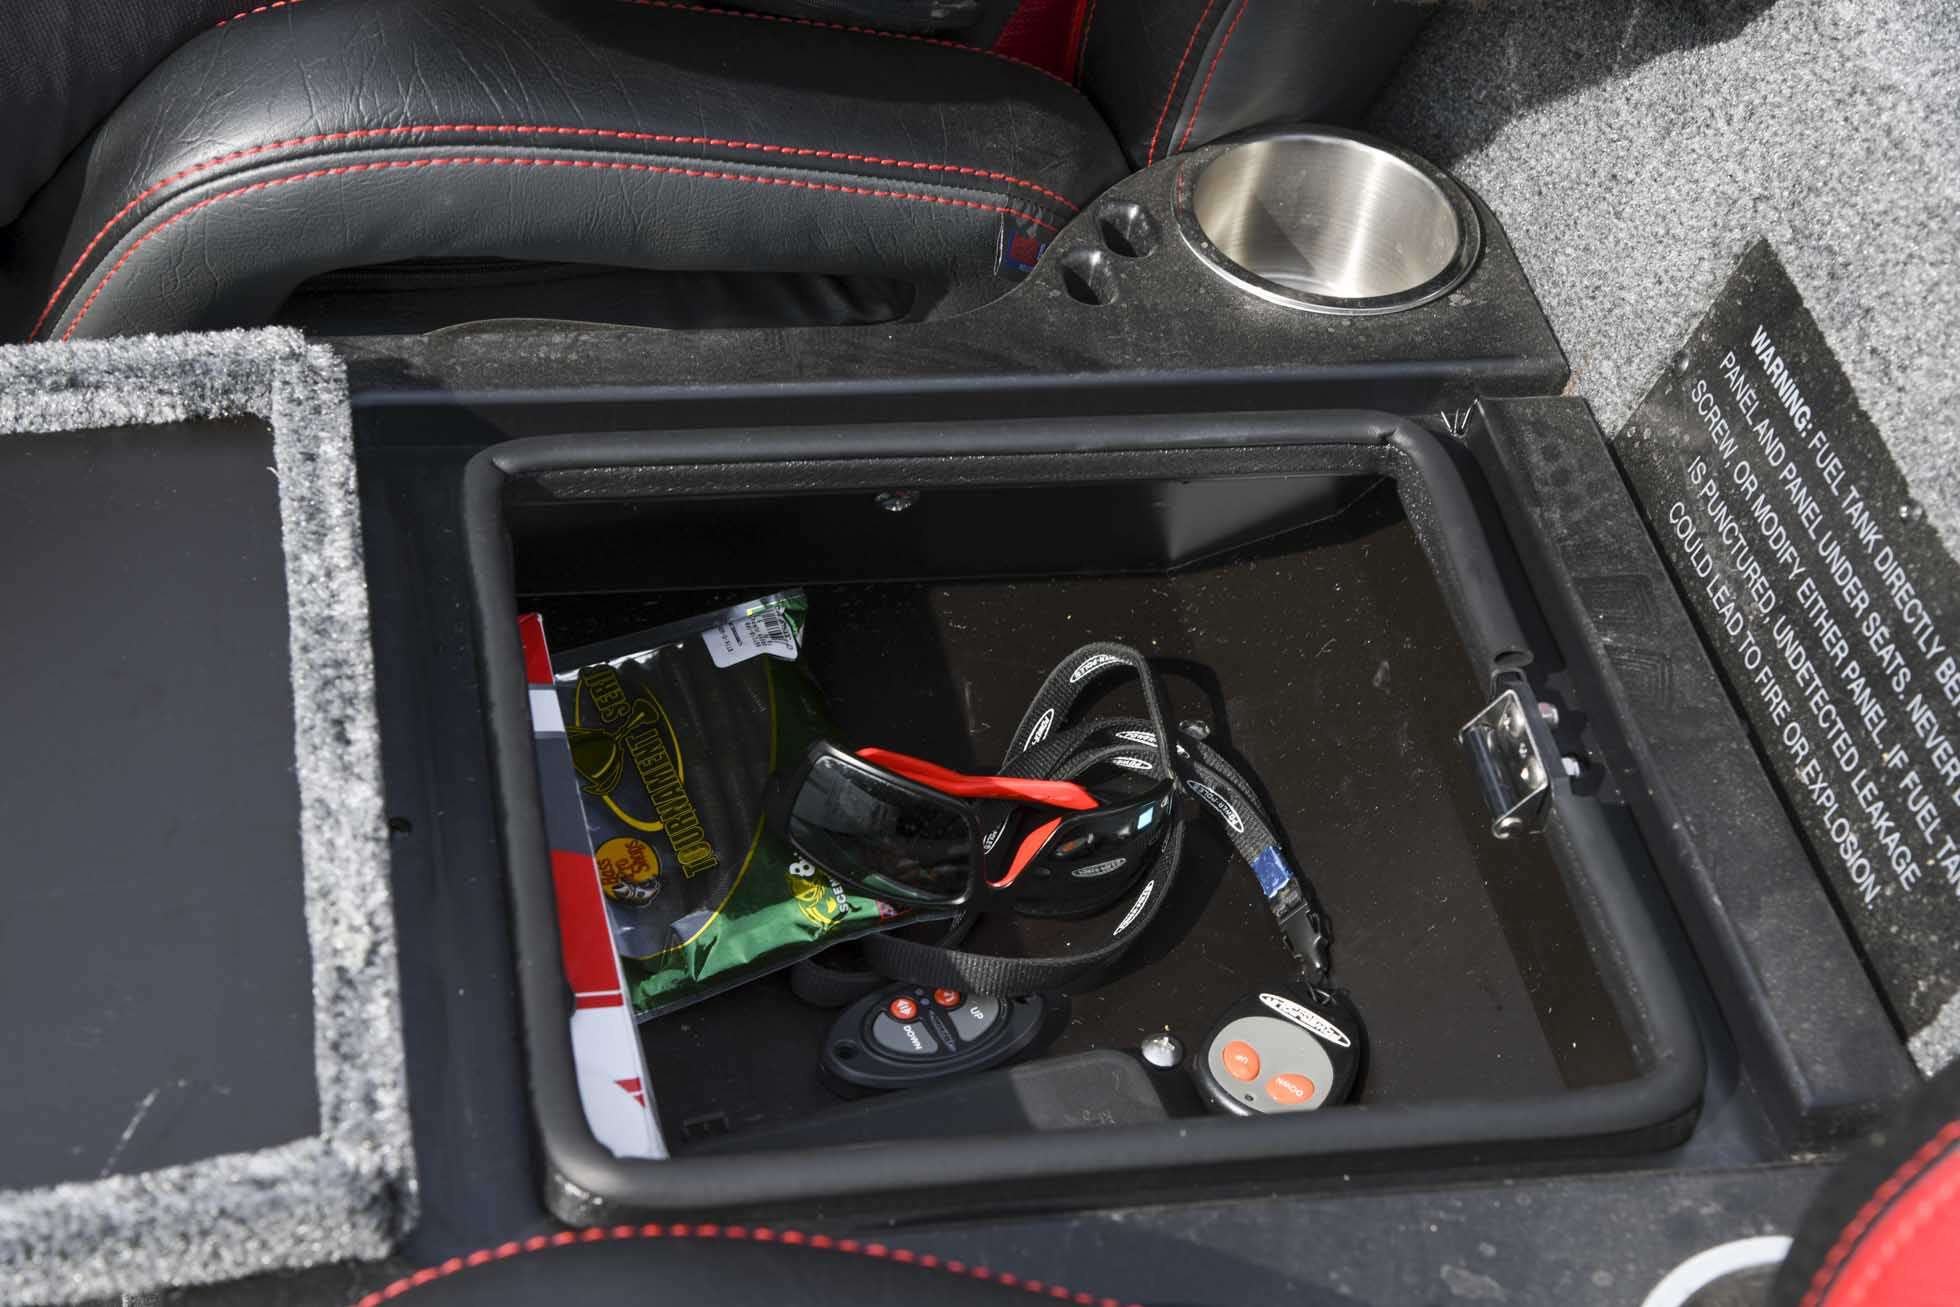 Between the seats is a well-designed storage compartment in which Mullins puts his keys, cellphone and other miscellany. âItâs just a great box,â Mullins said. âMy other boat didnât have anything like that.â
